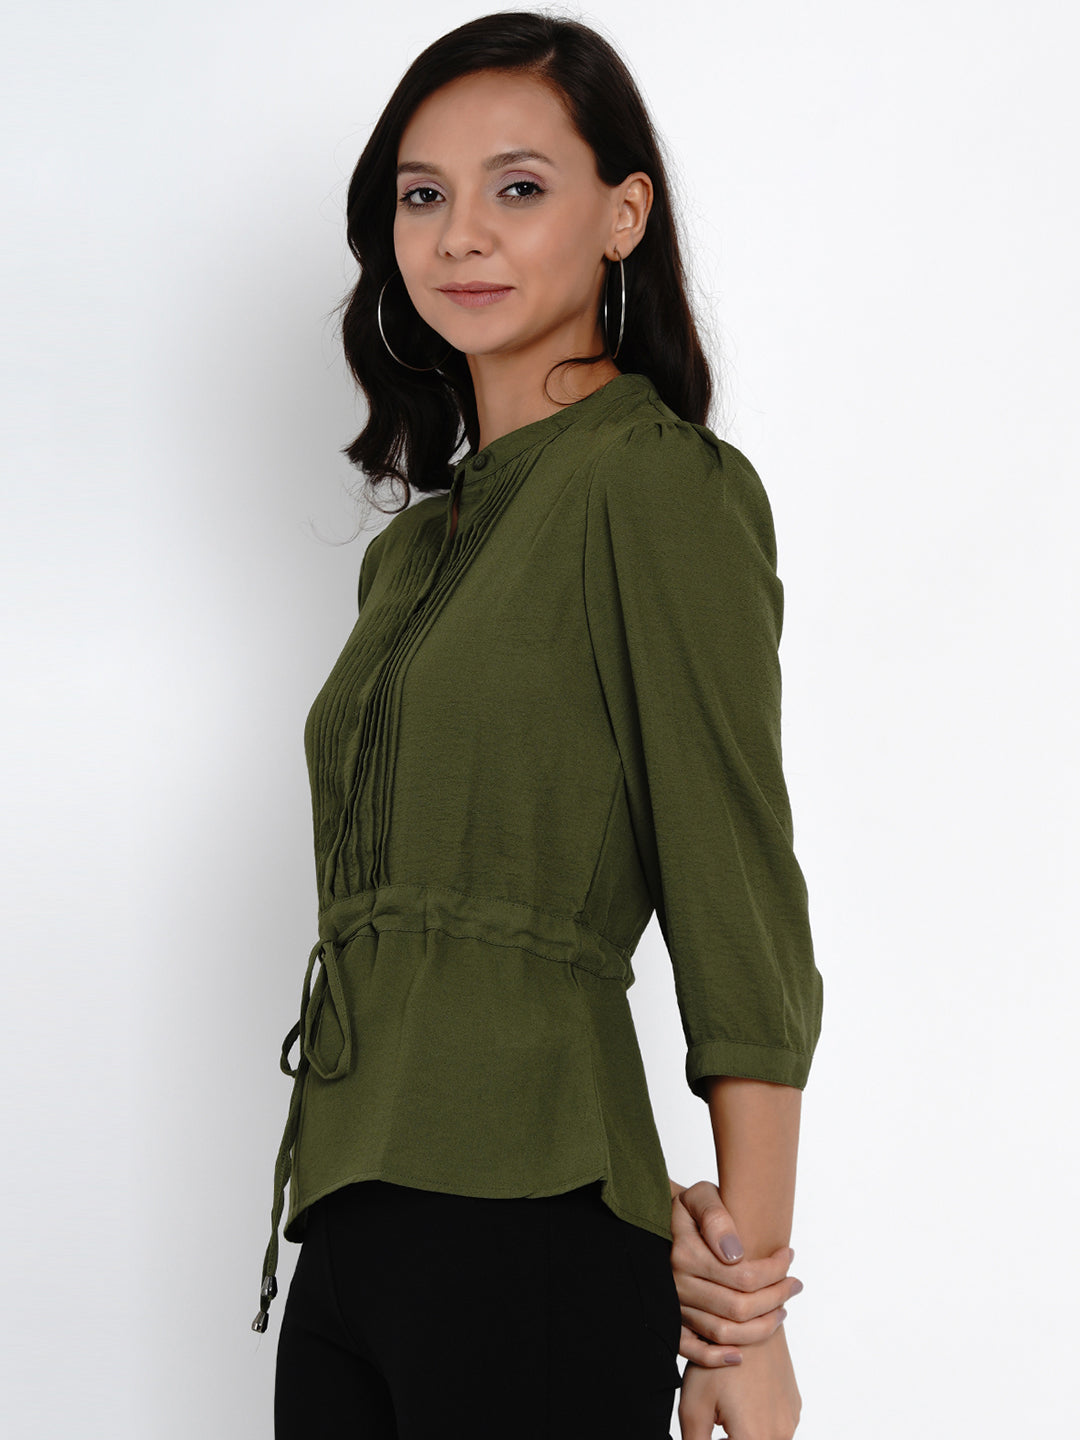 Green 3/4 Sleeve Blouse With Tie